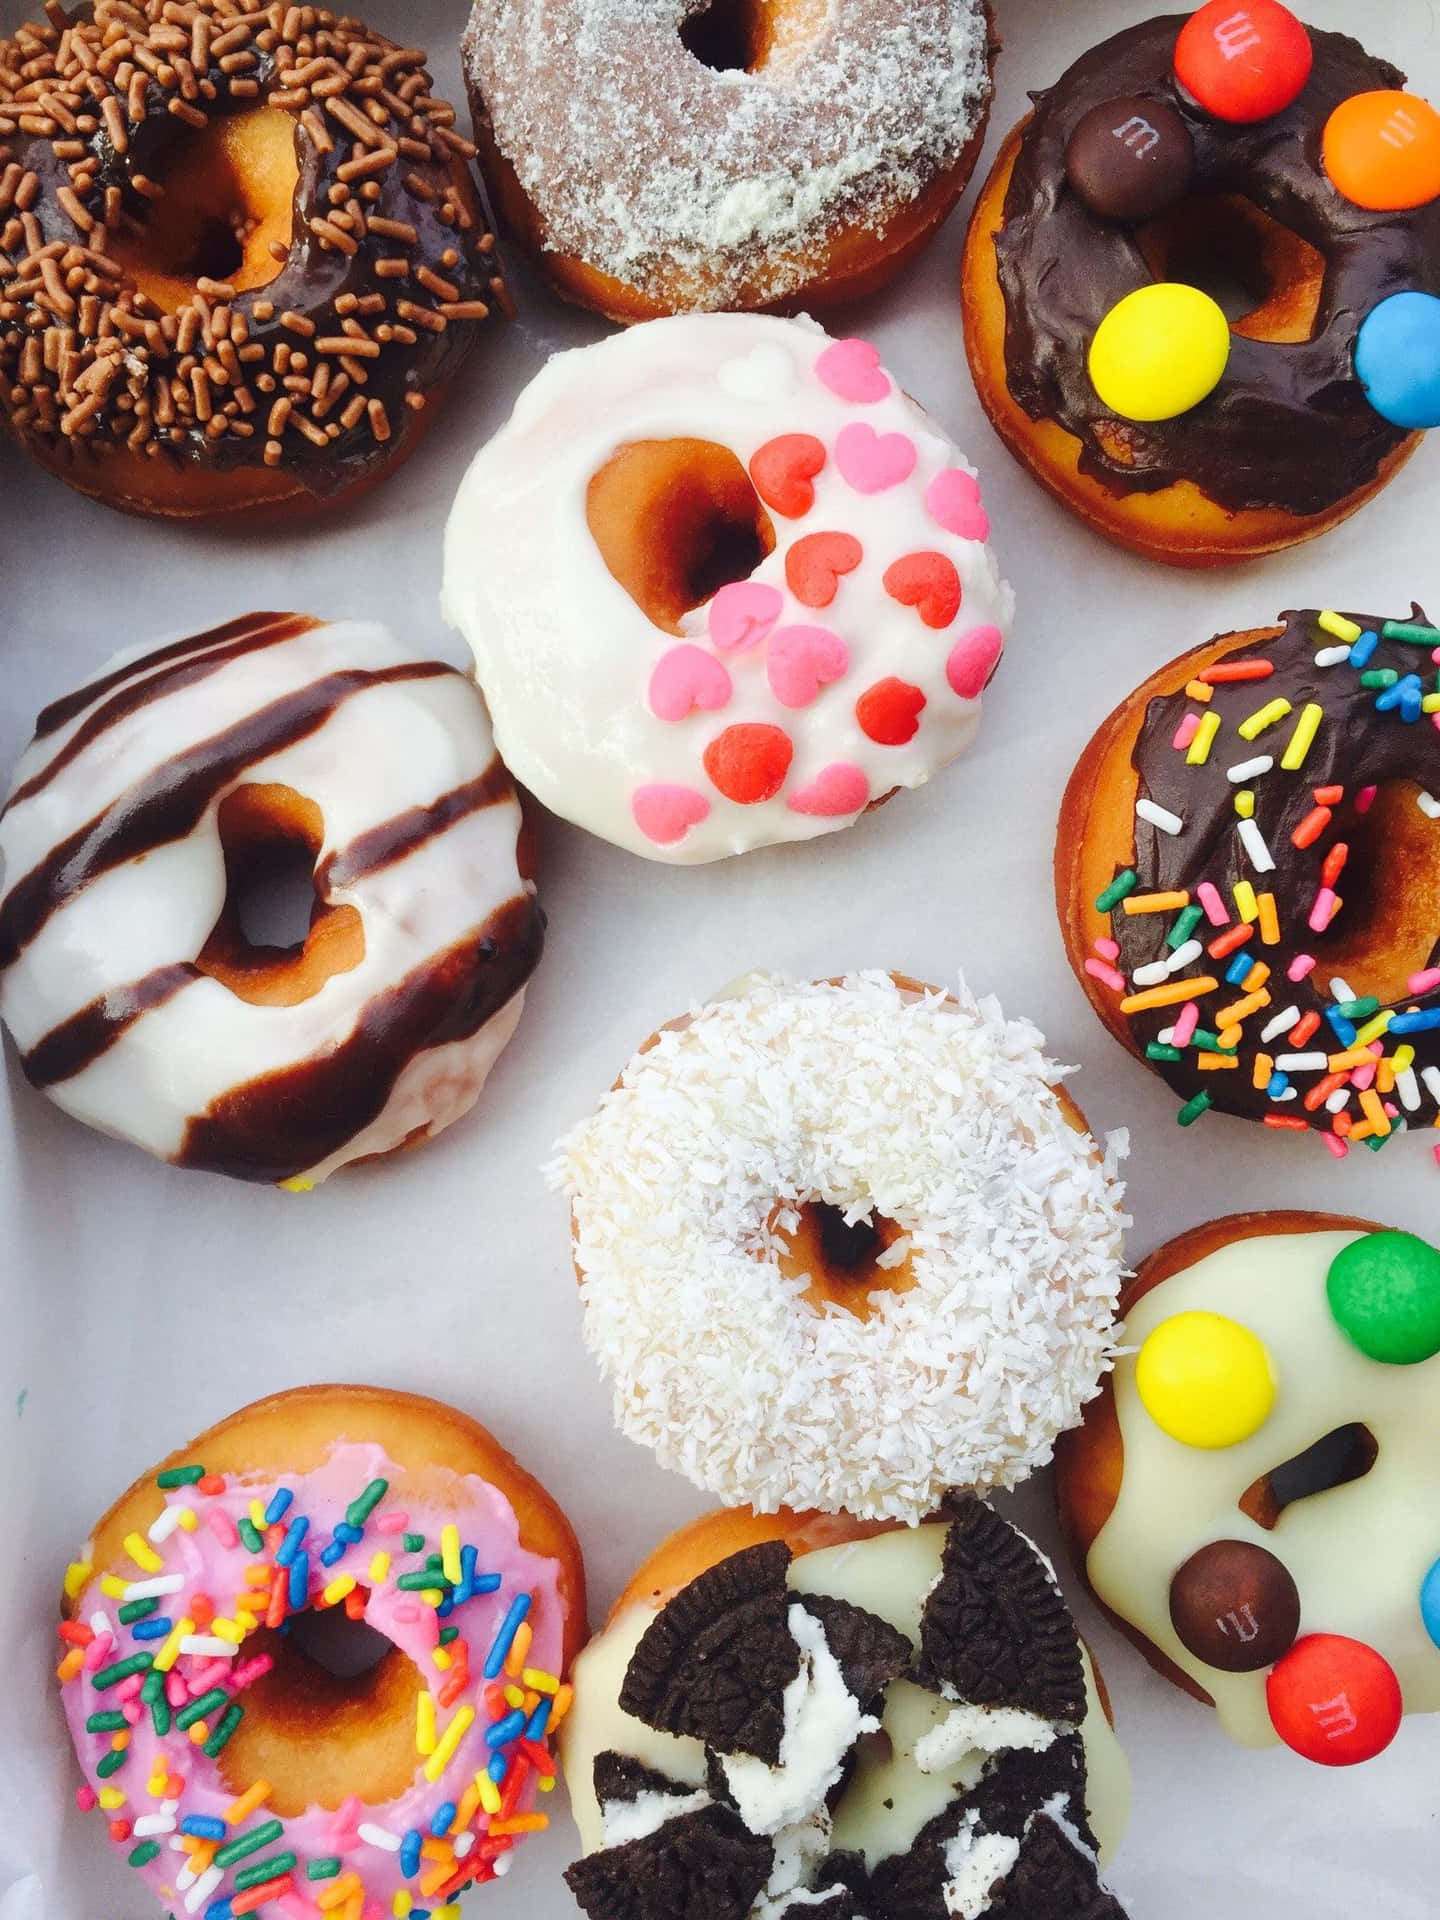 A Delightful Array Of Colorful Donuts